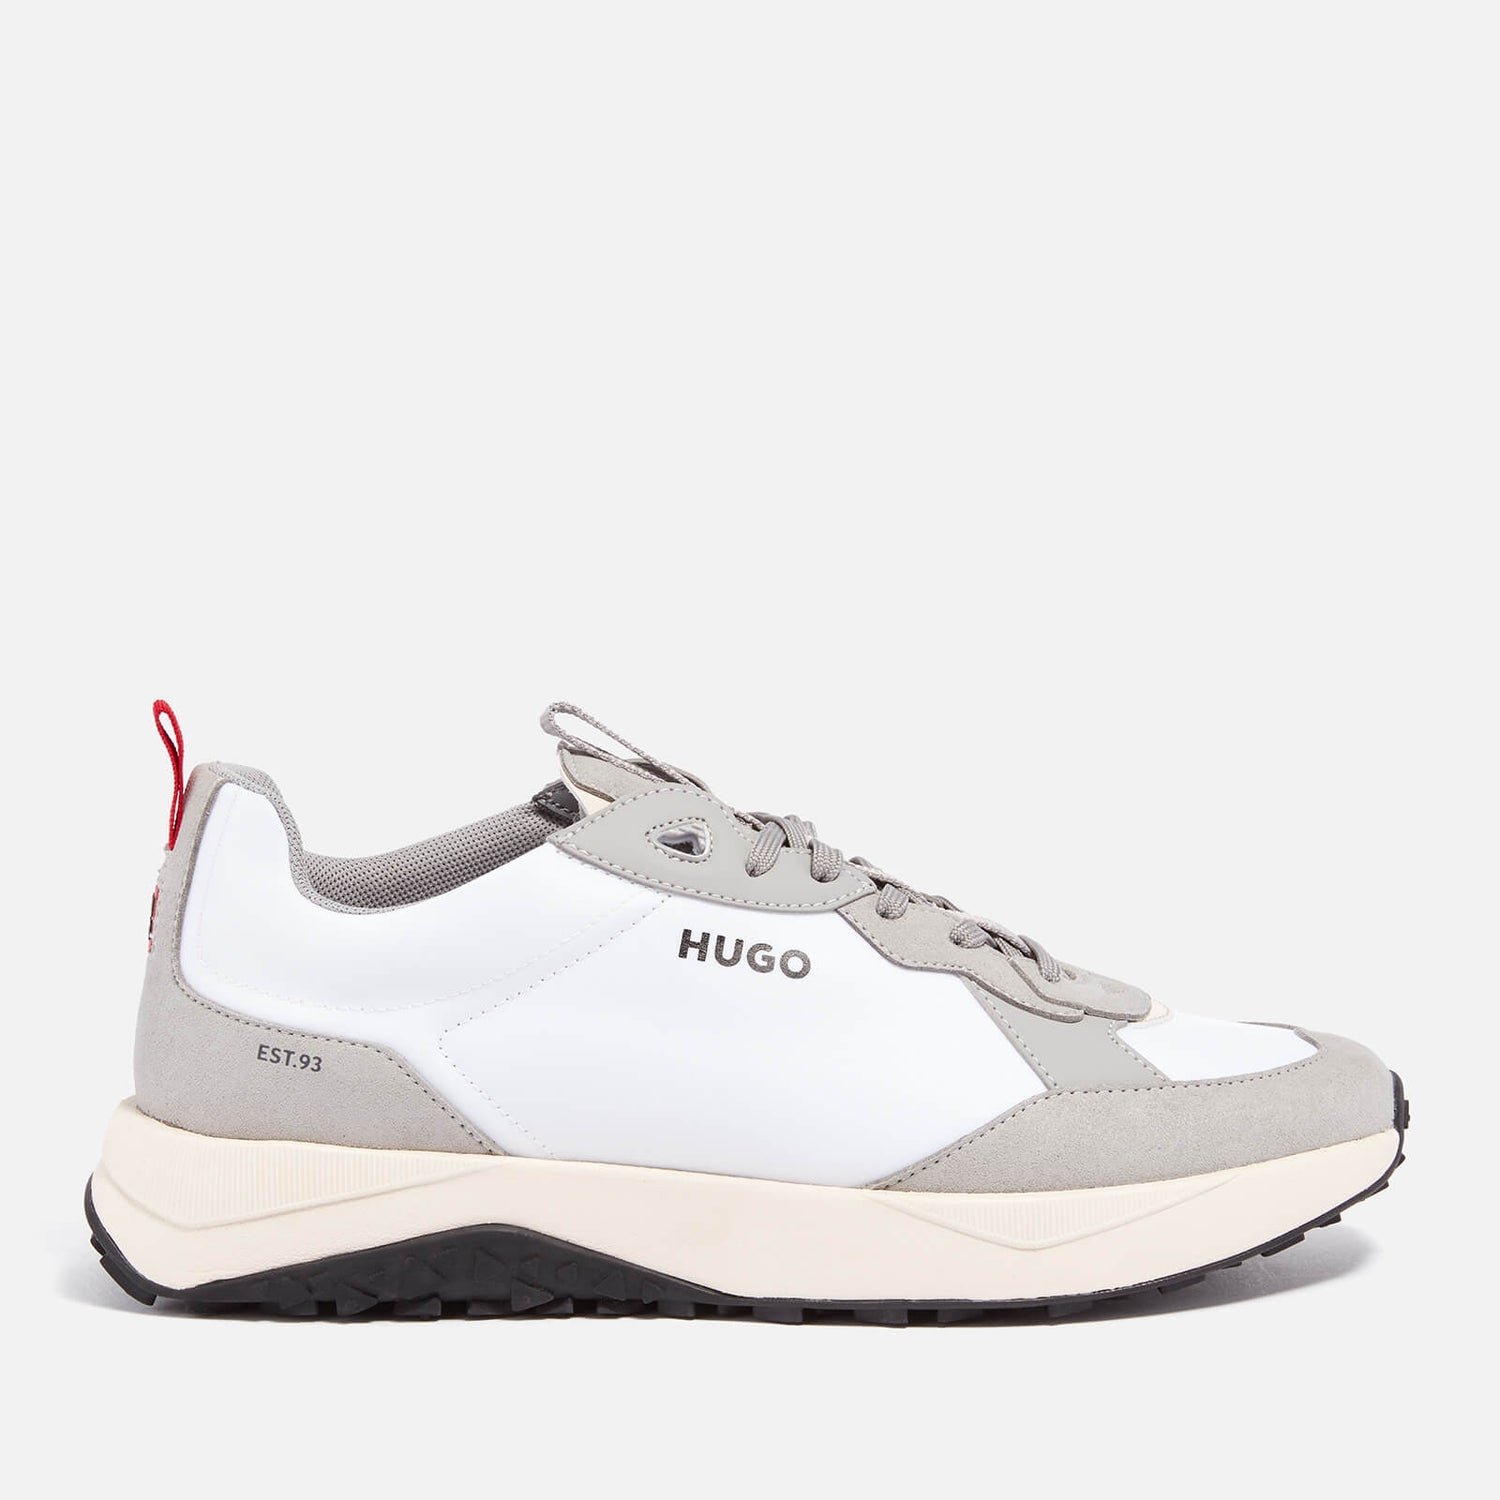 HUGO Men's Kane Runn Mfny N Shell and Faux Suede Trainers - UK 8